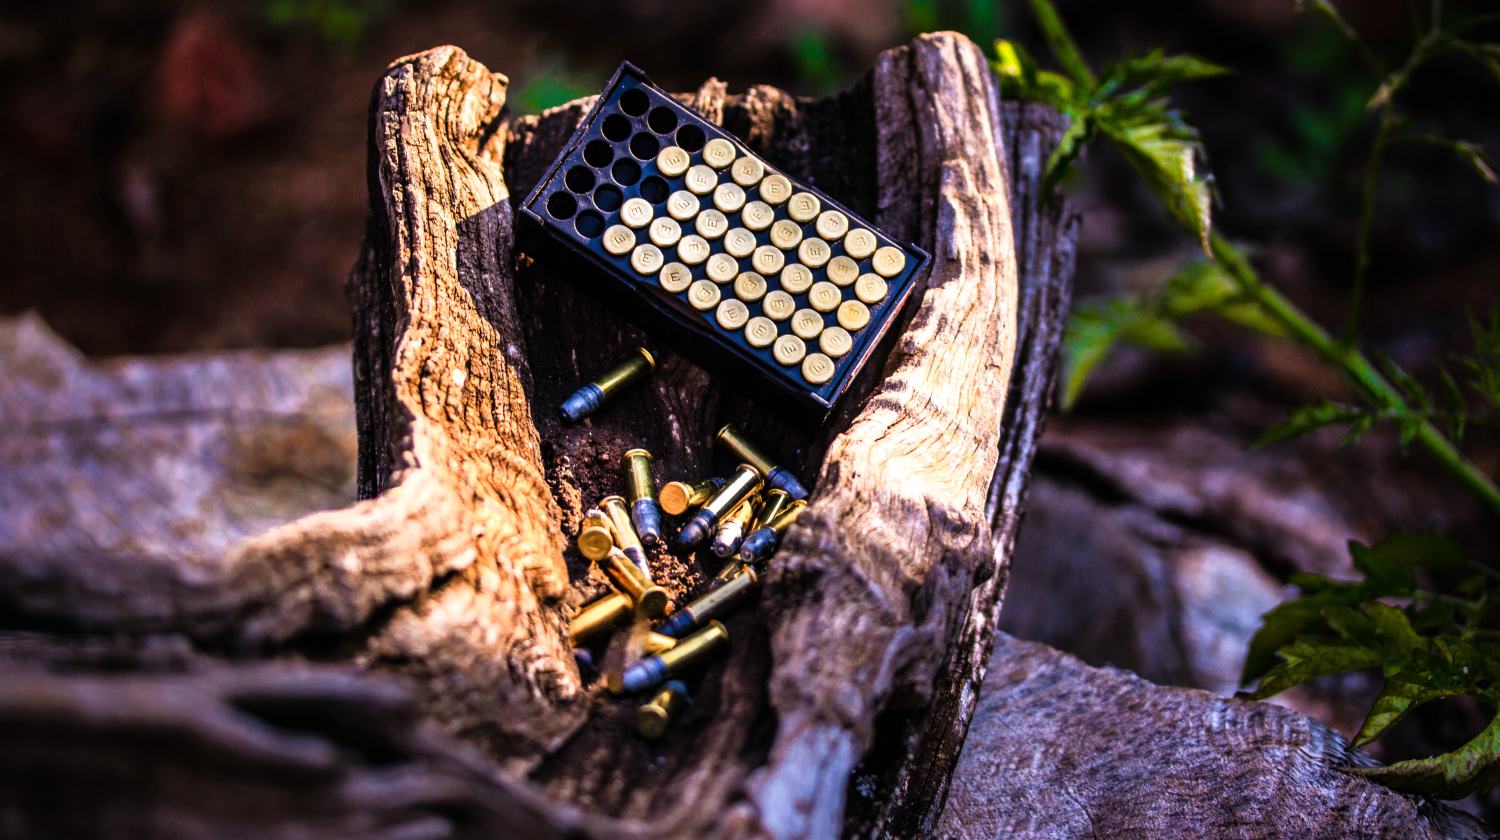 Feature | Ammo in wooden tree | The Curious Case of the Over-Penetrating Round